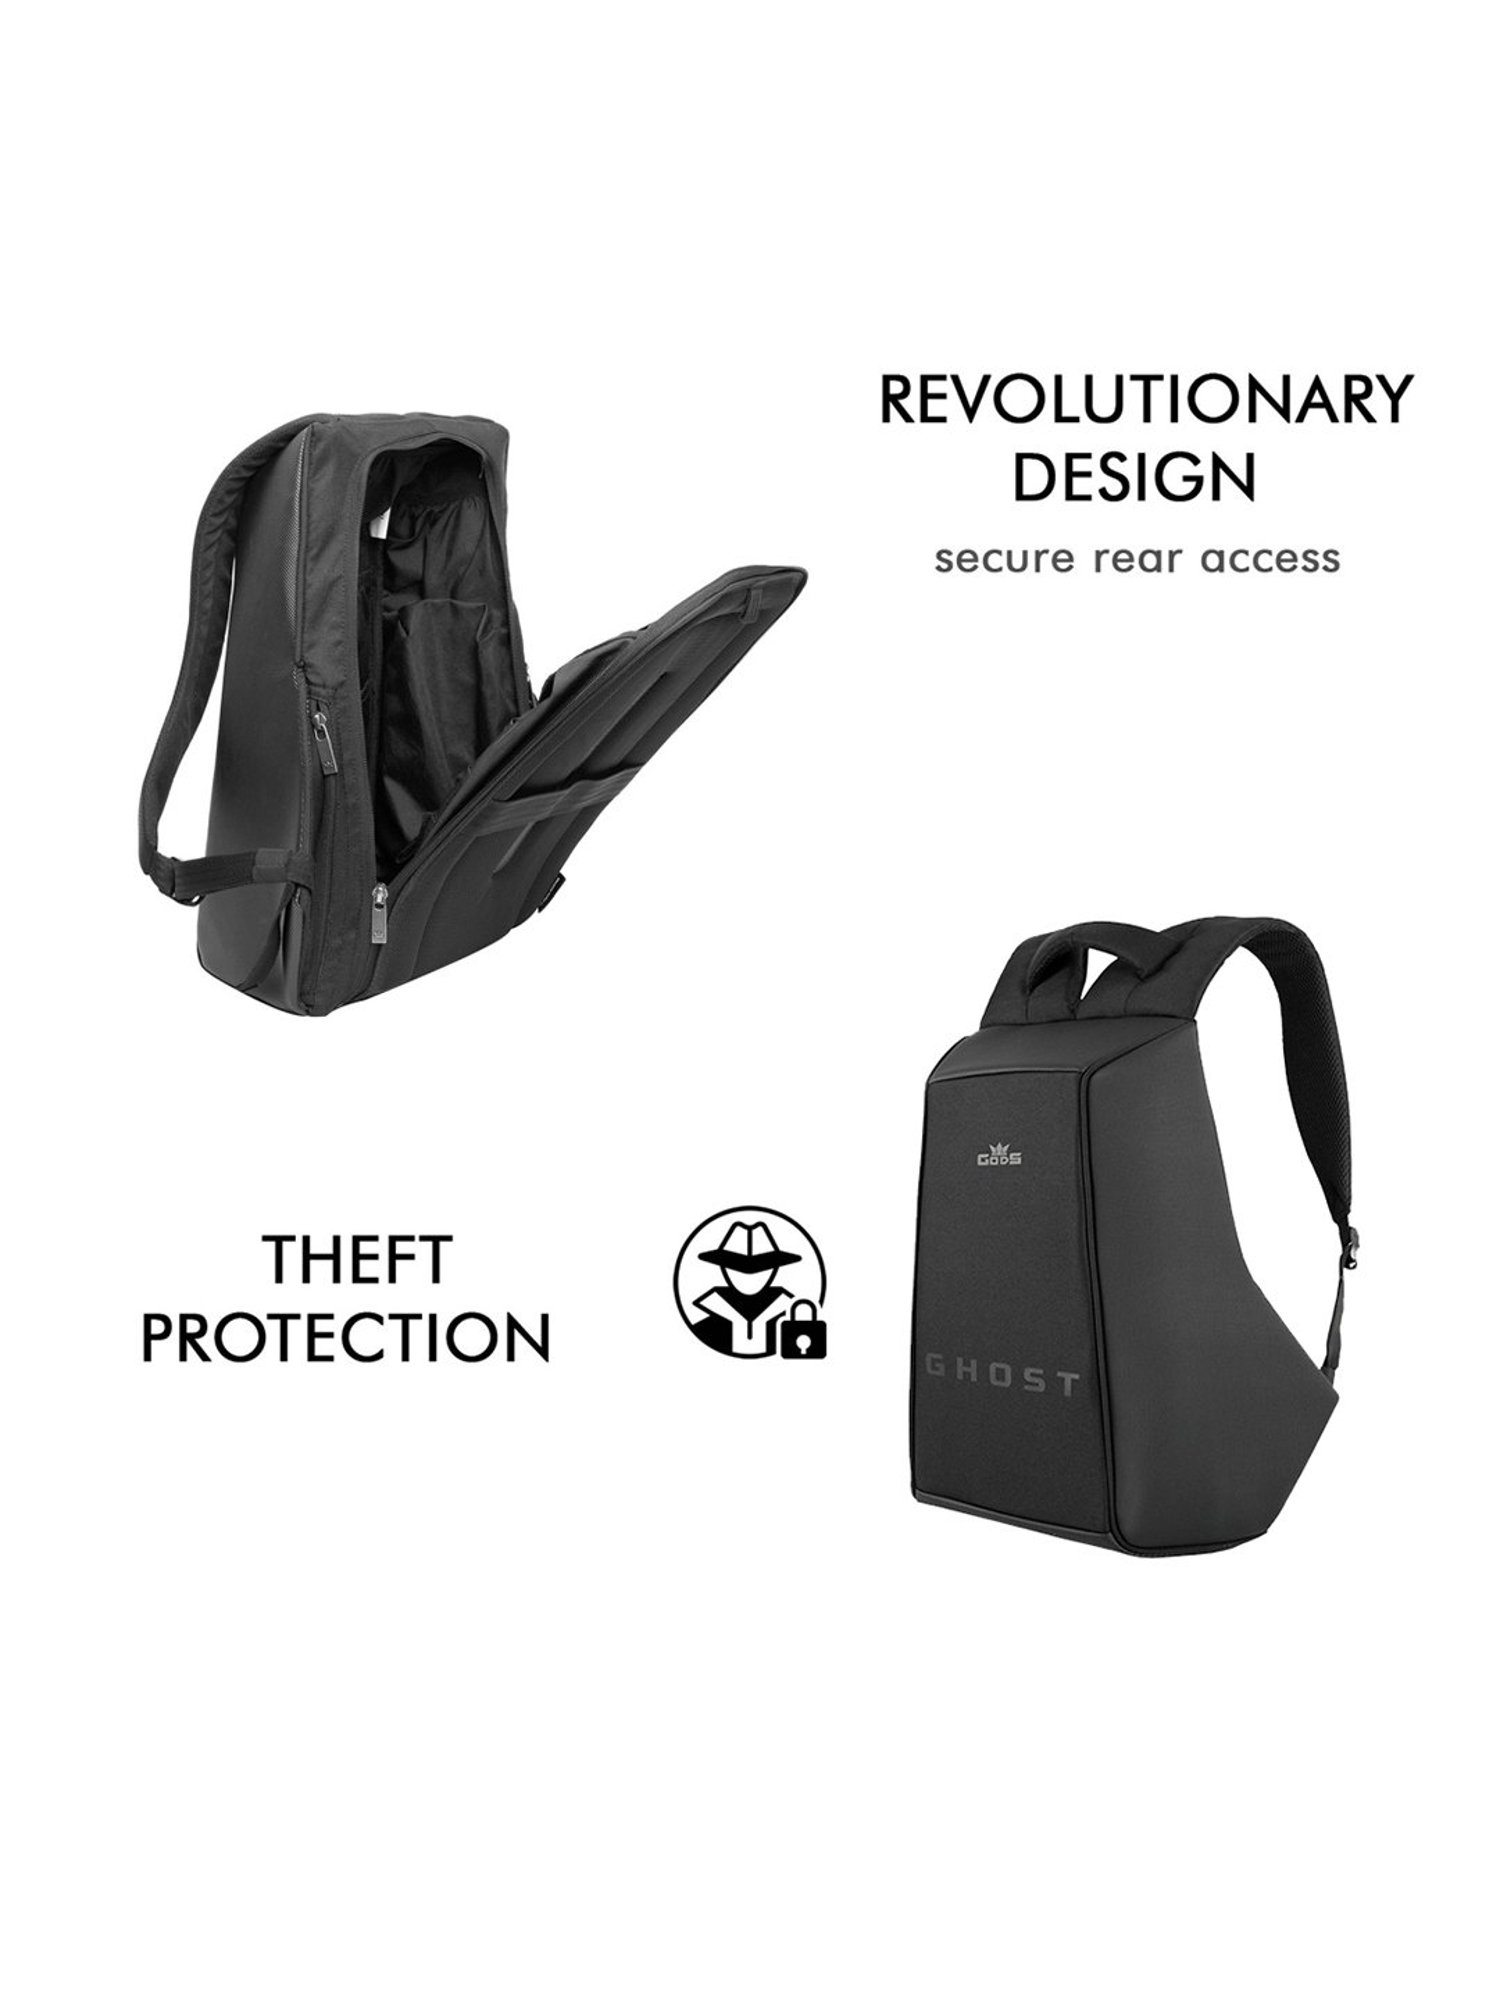 GHOST MK II backpack - Direct Action® Advanced Tactical Gear